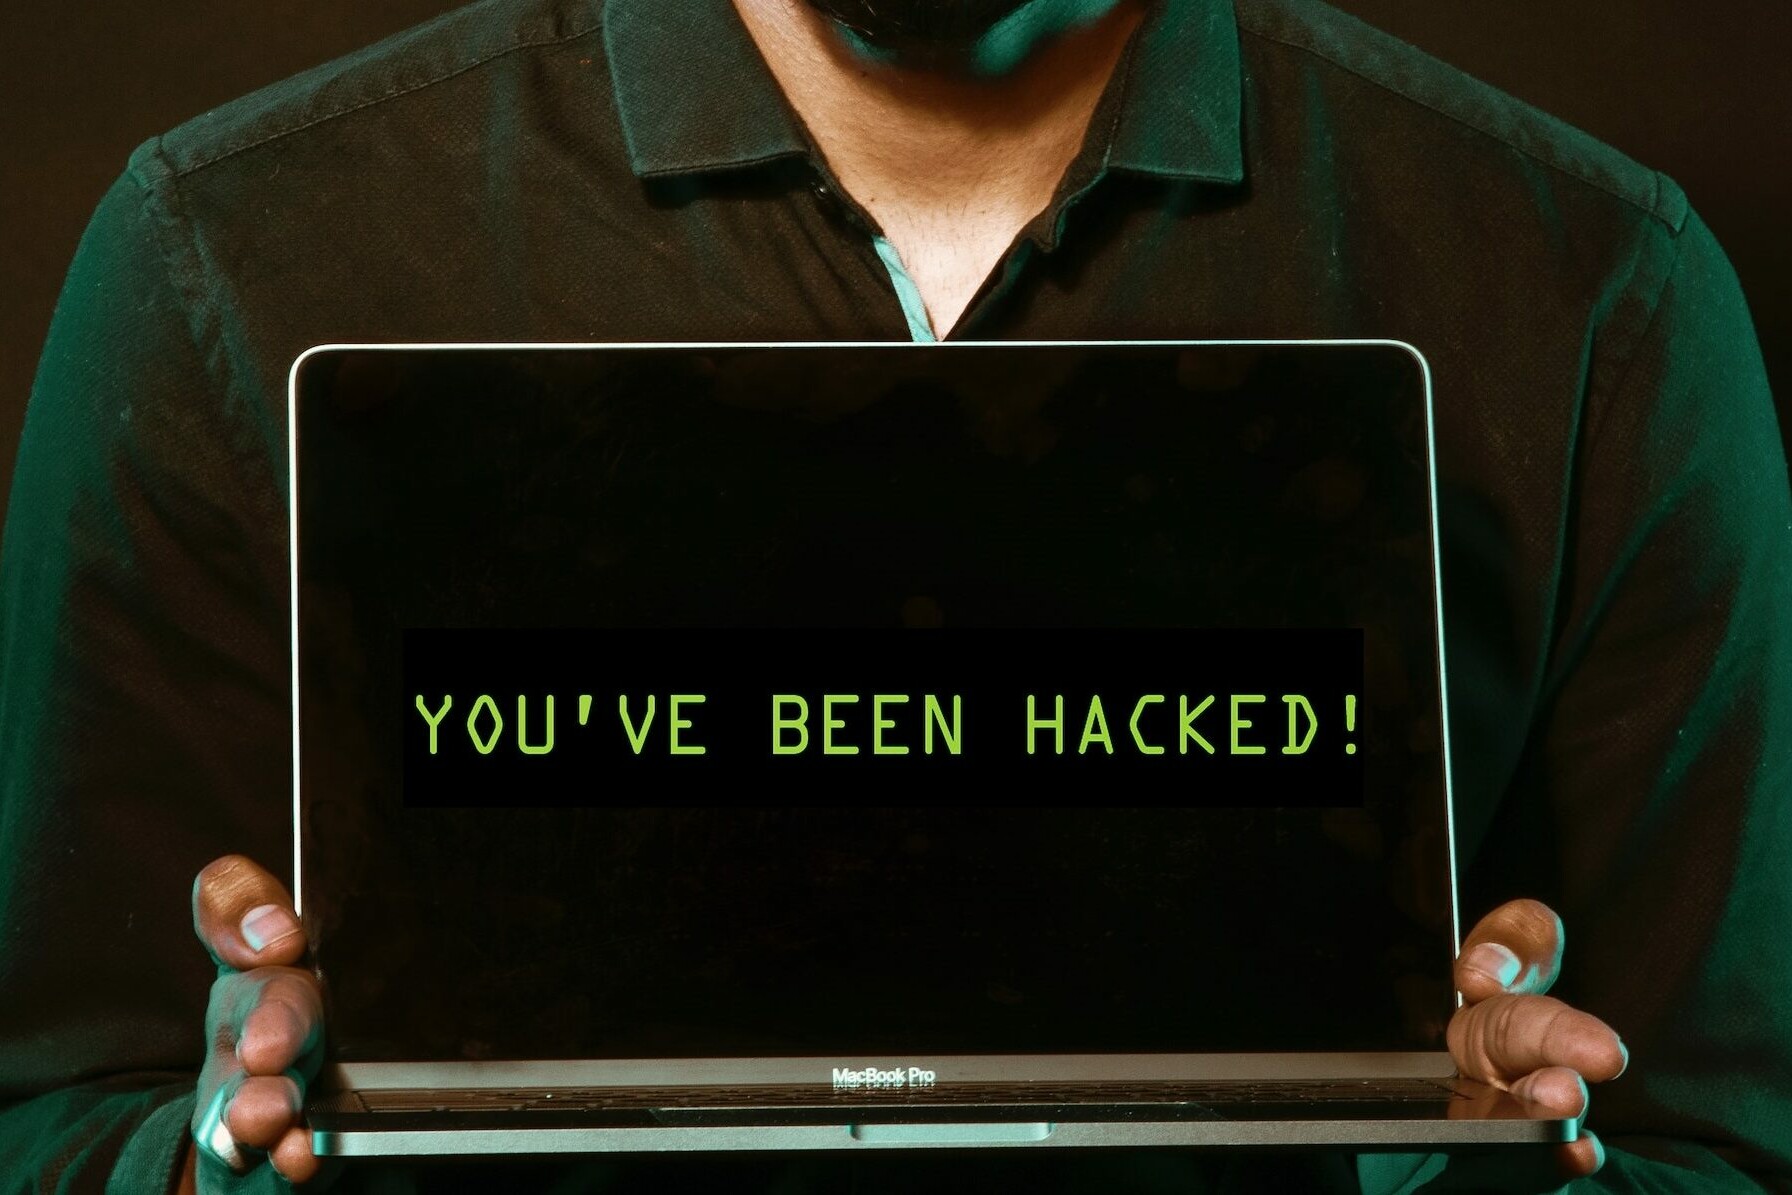 How will a cyber attack affect you?